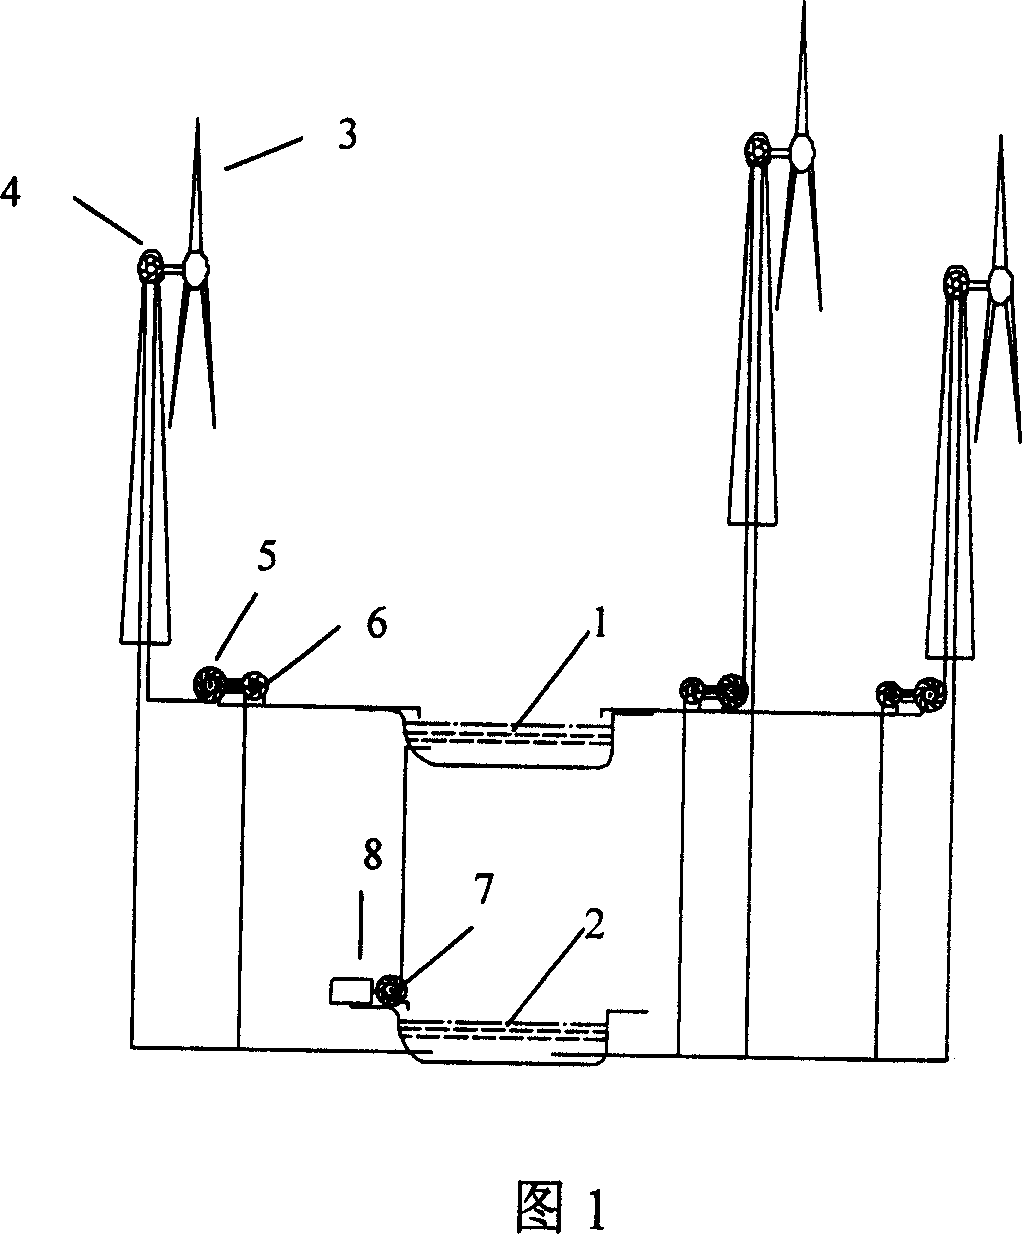 Wind-power pumping water generating system